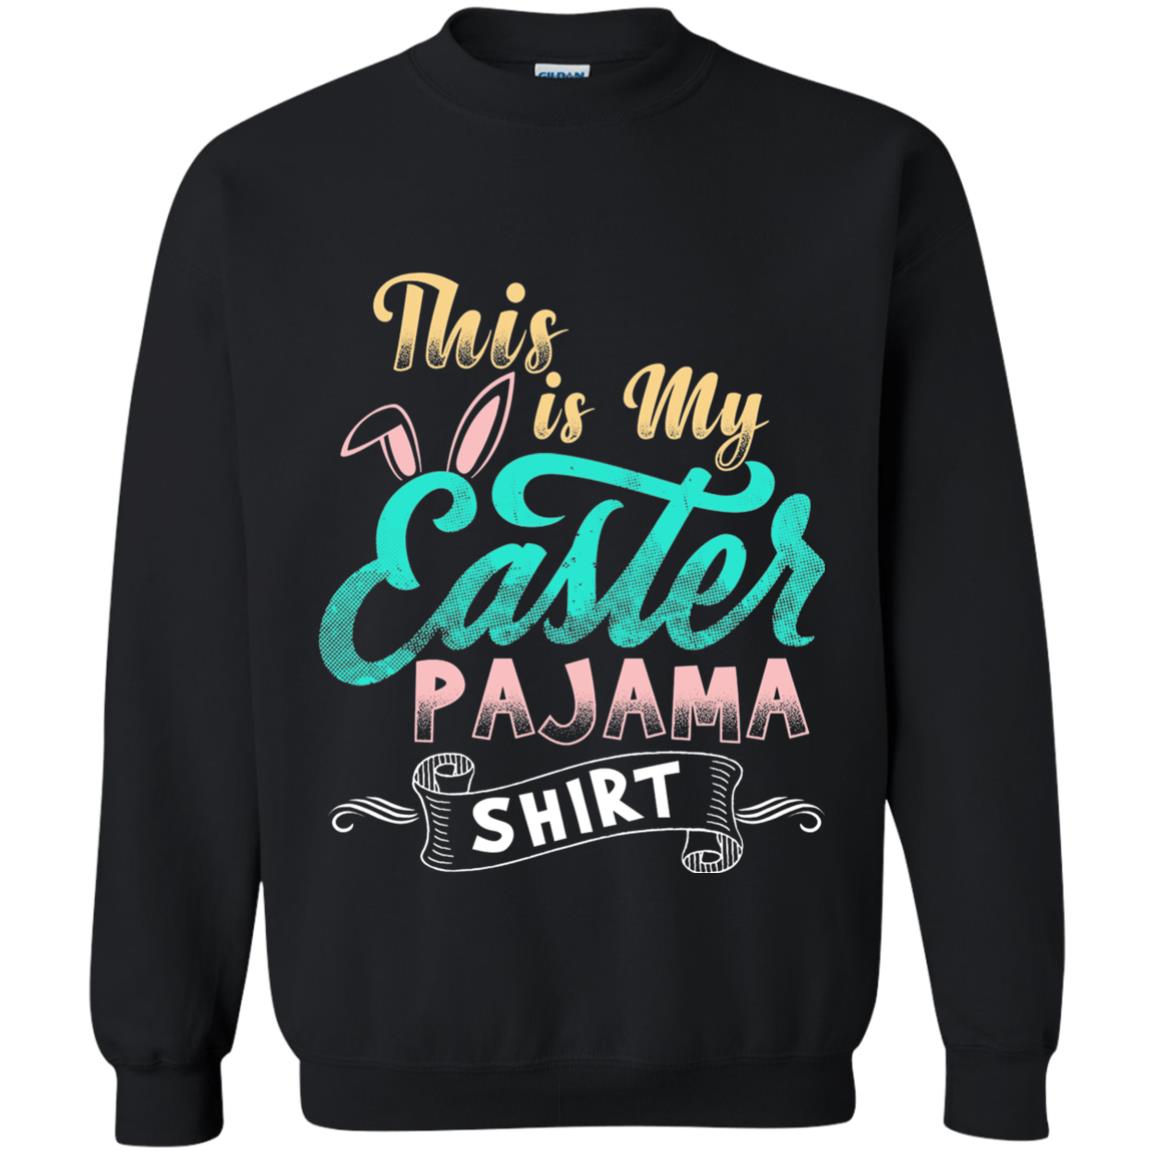 Easter T-shirt This Is Easter Pajama Shirt